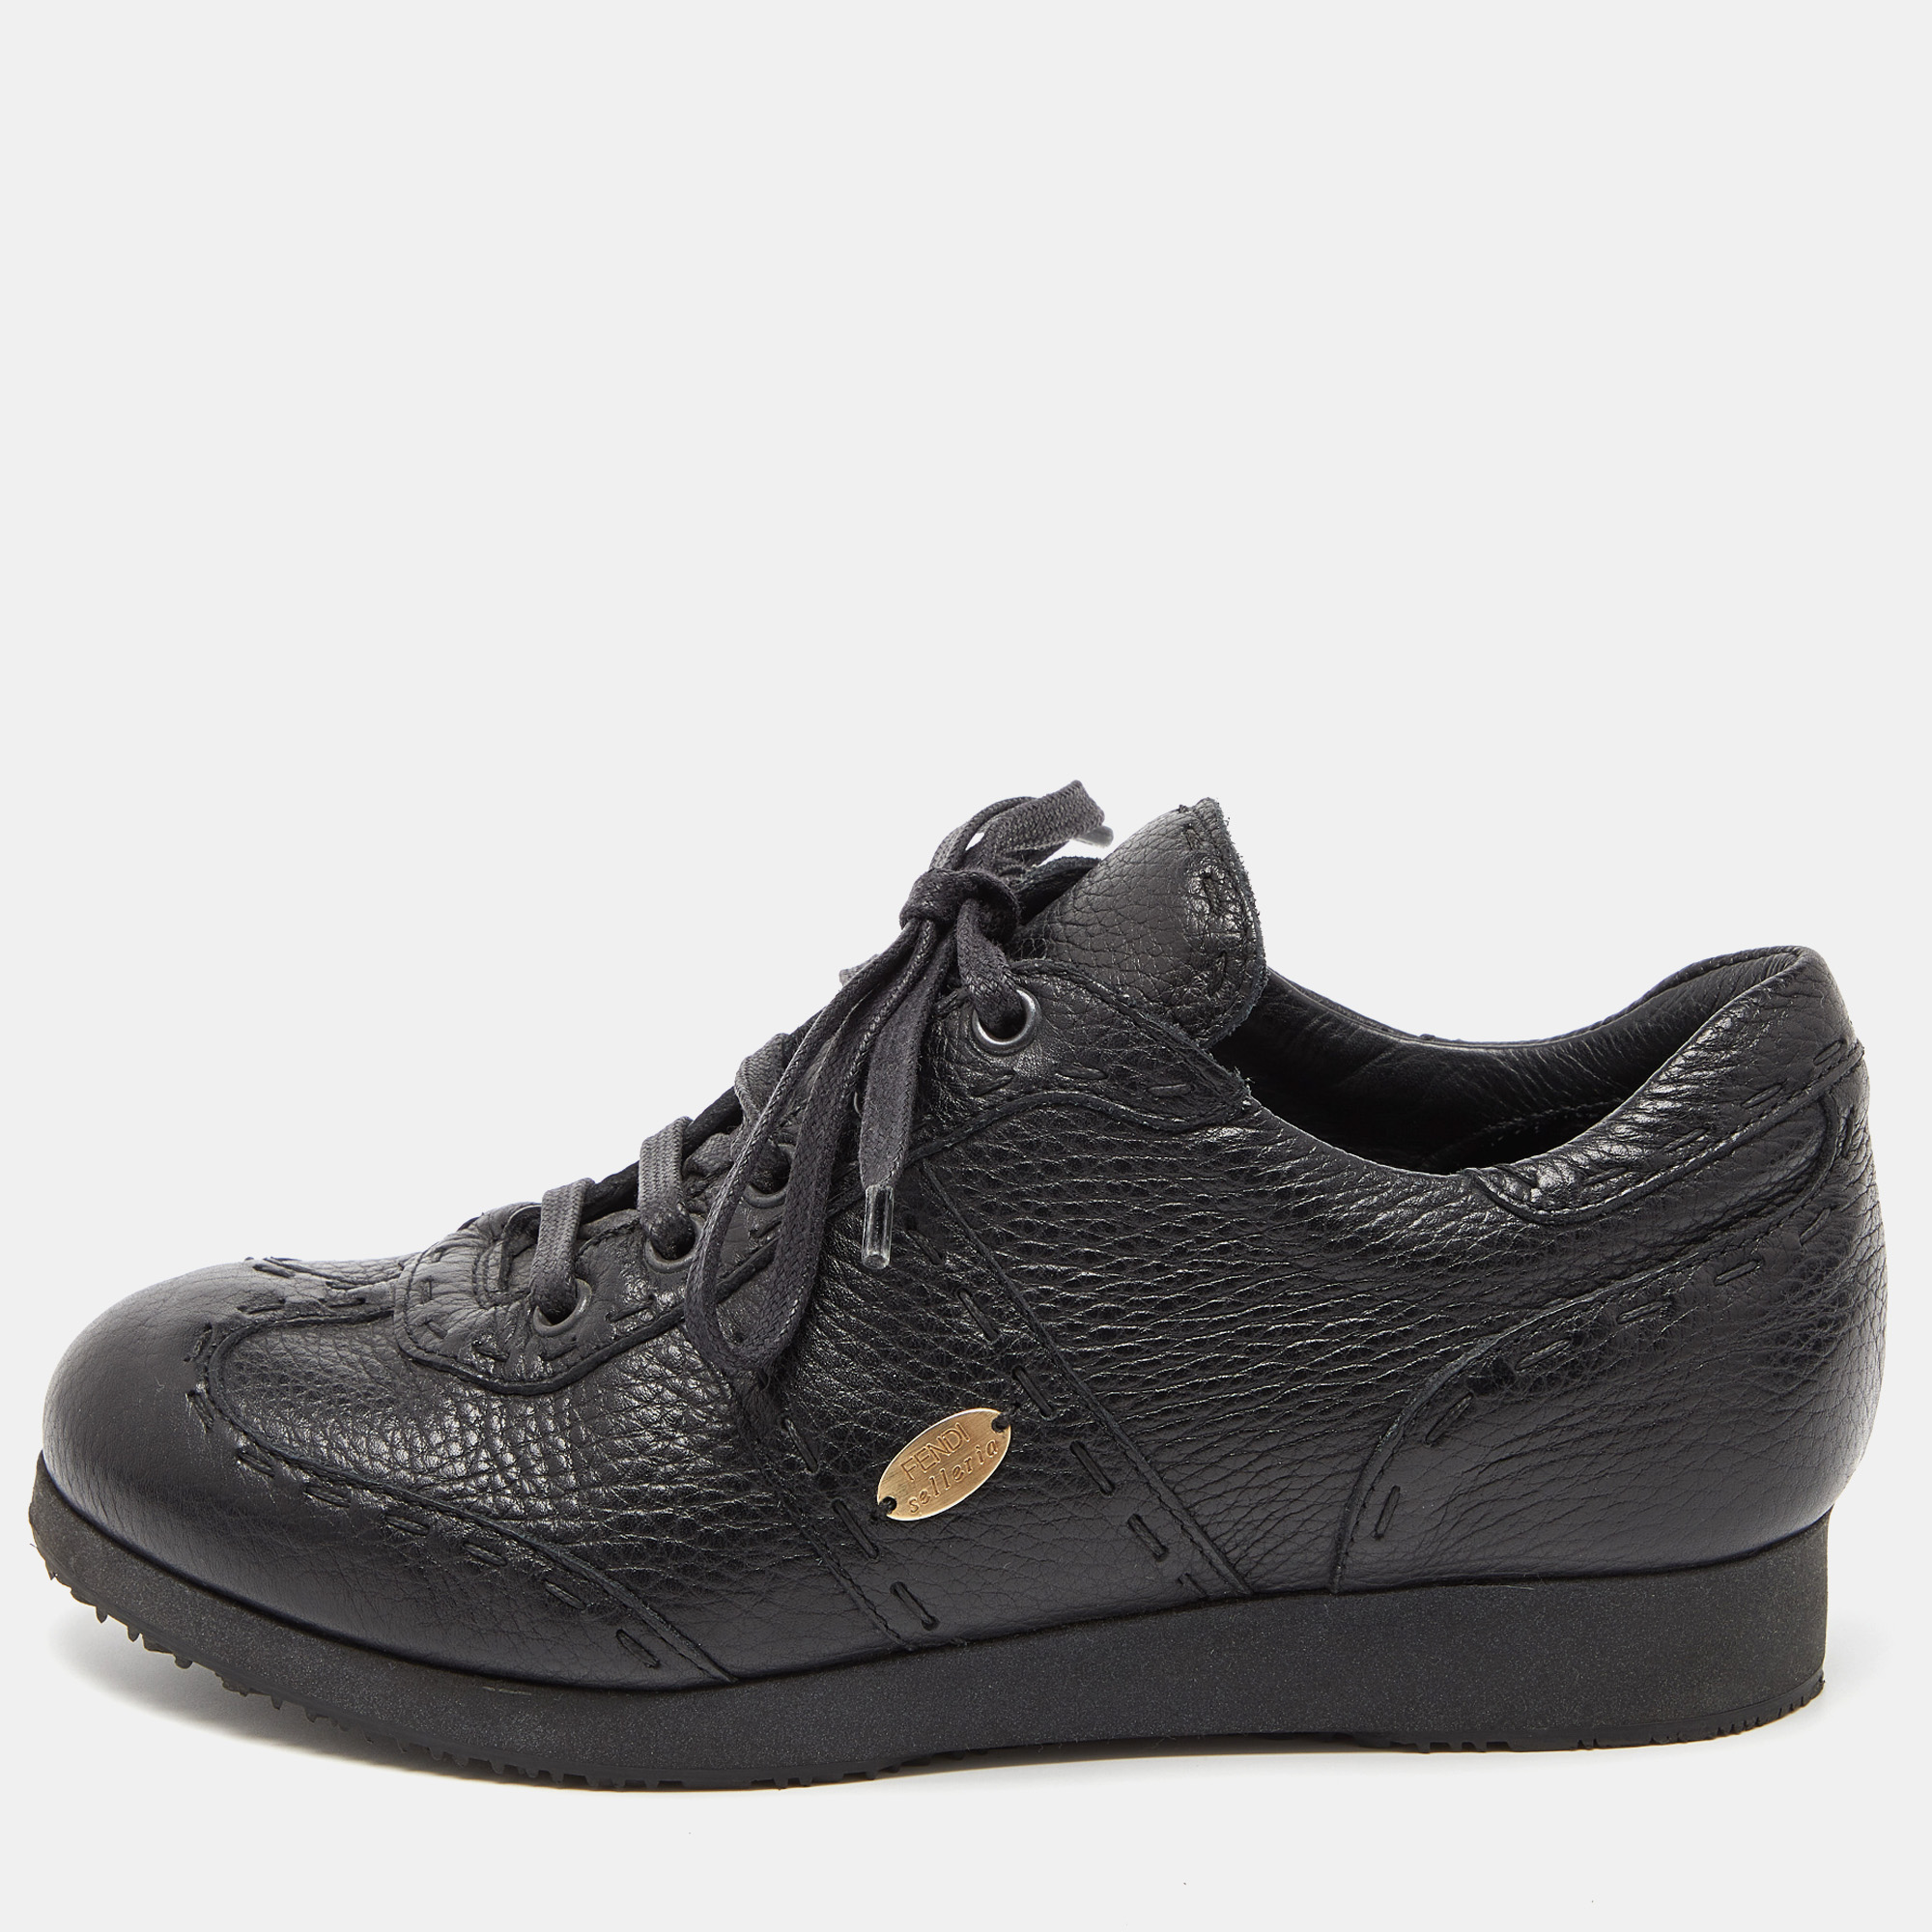 Fendi Black Leather Low Top Sneakers Size 36.5